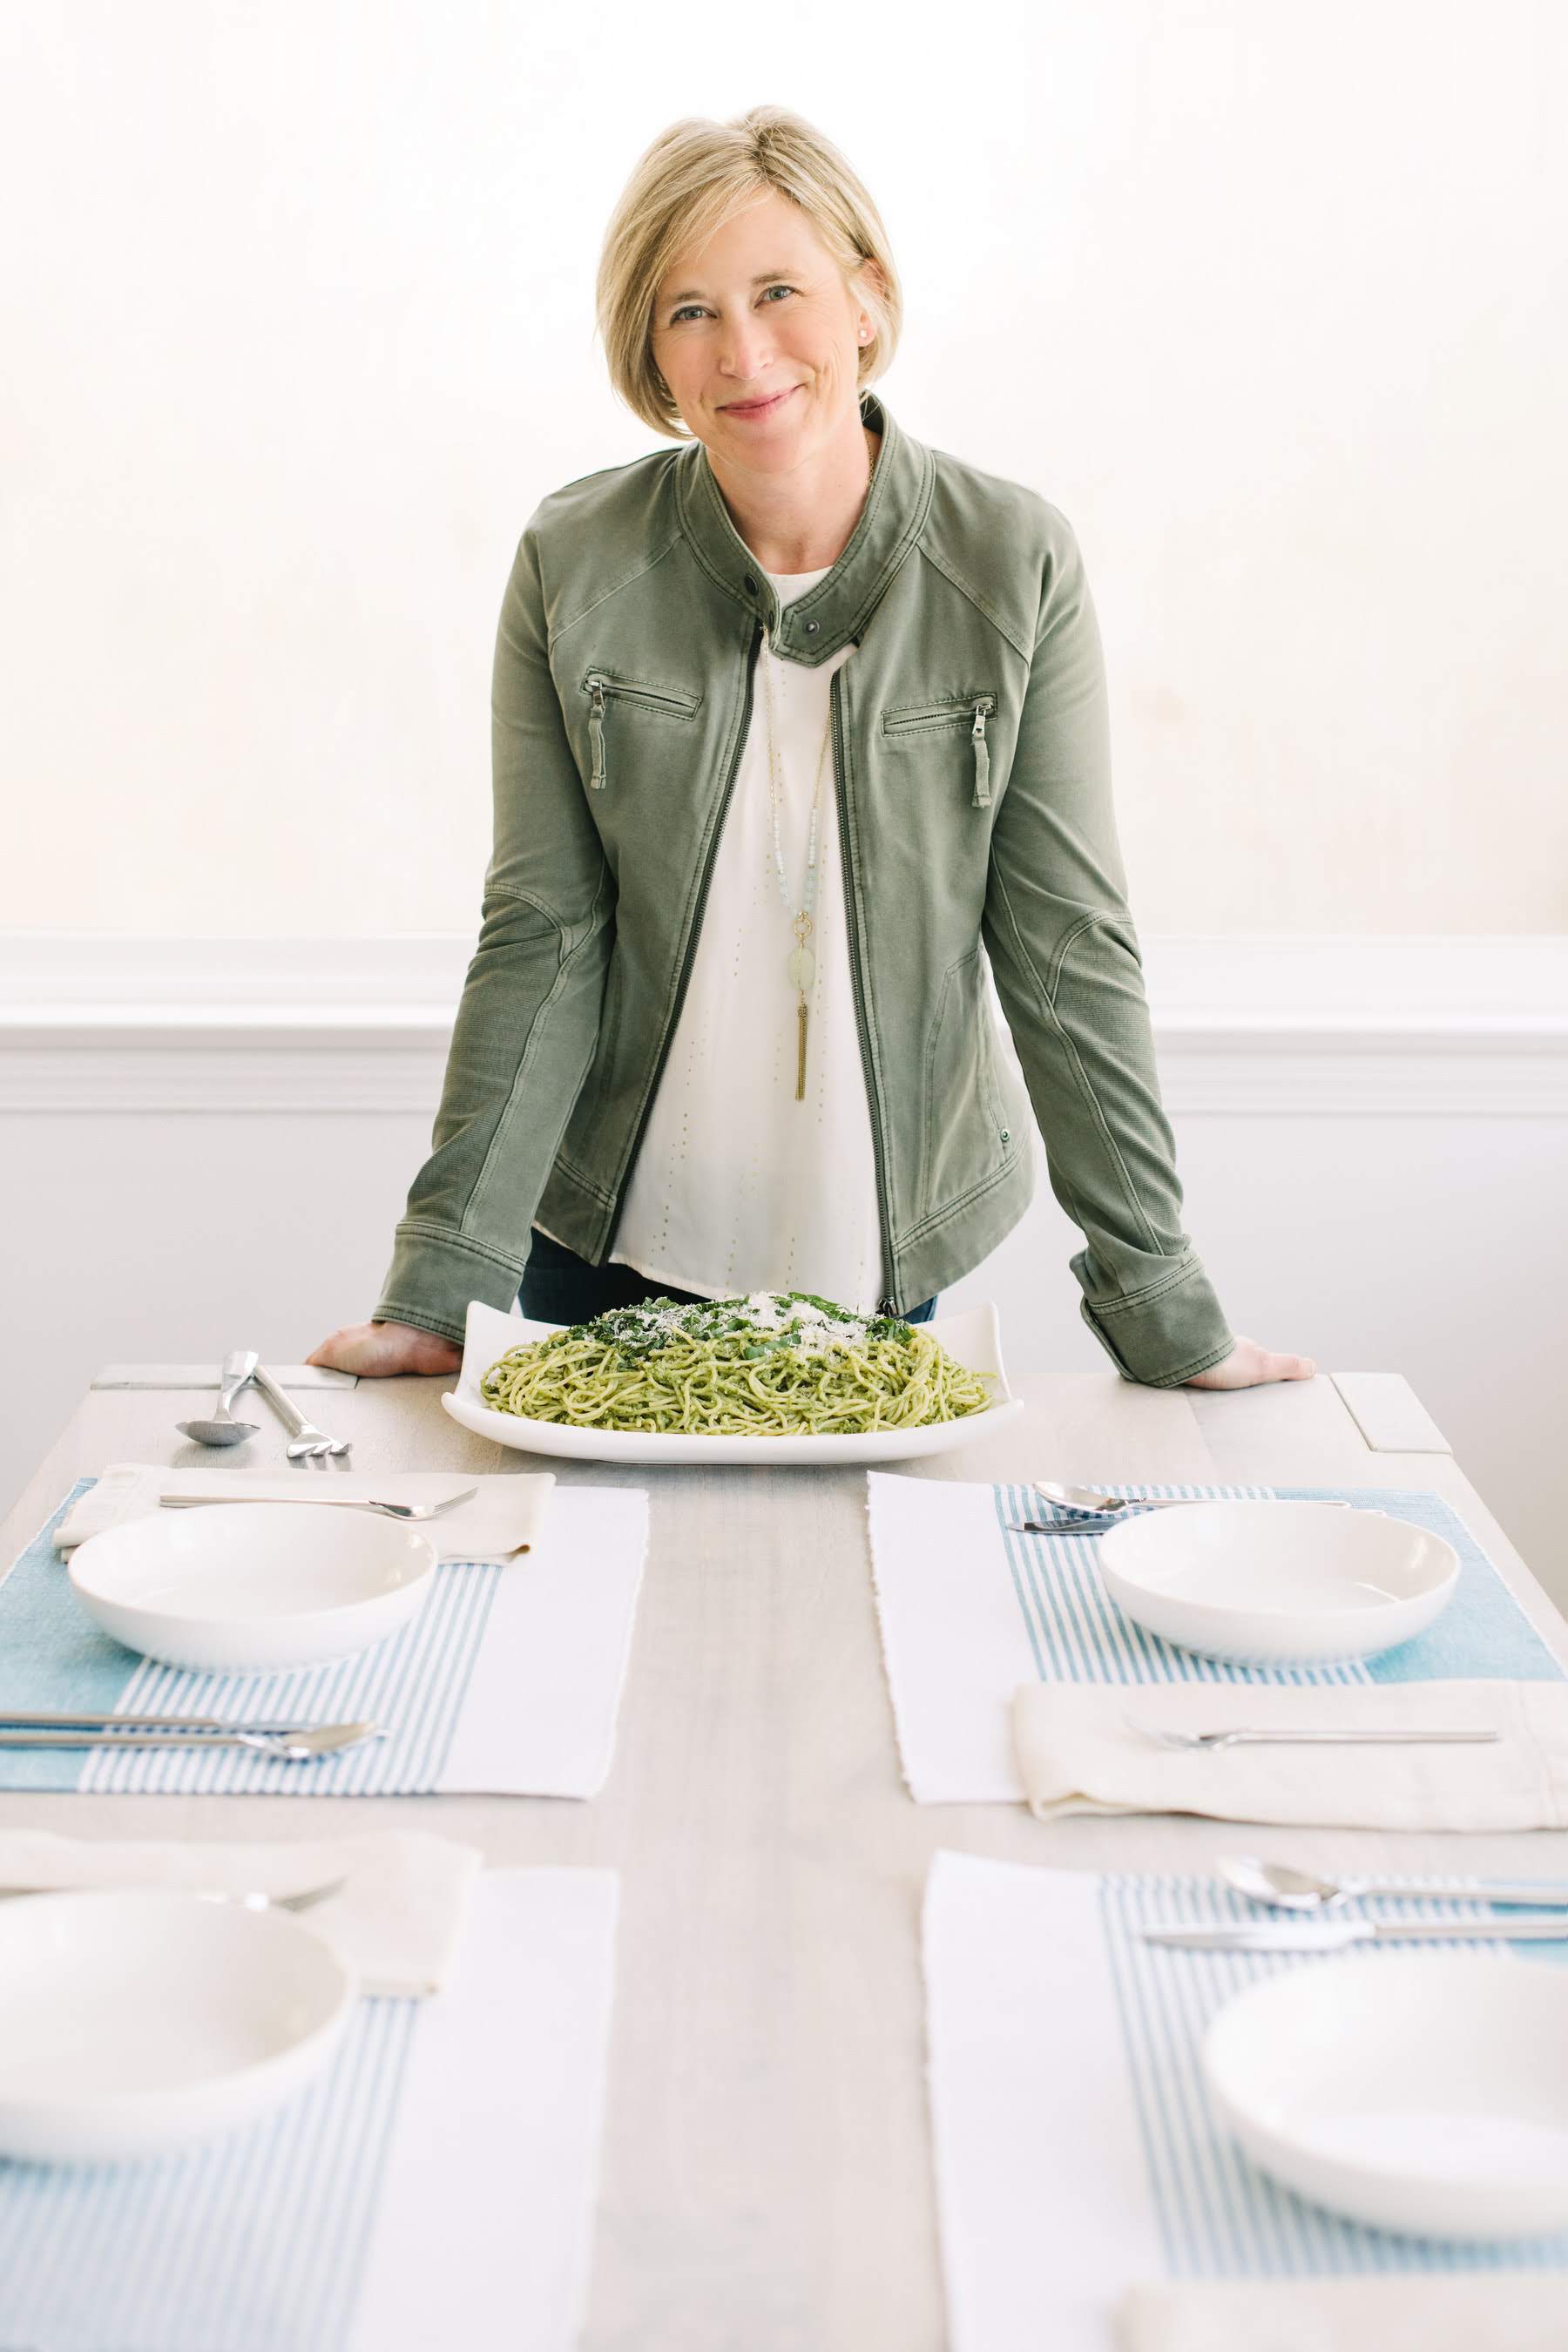 Raddish Kids Founder Samantha Barnes founded and bootstrapped the company in 2013. Raddish will ship its millionth kit this year and has helped more than 200,000 kids find confidence in the kitchen and beyond.